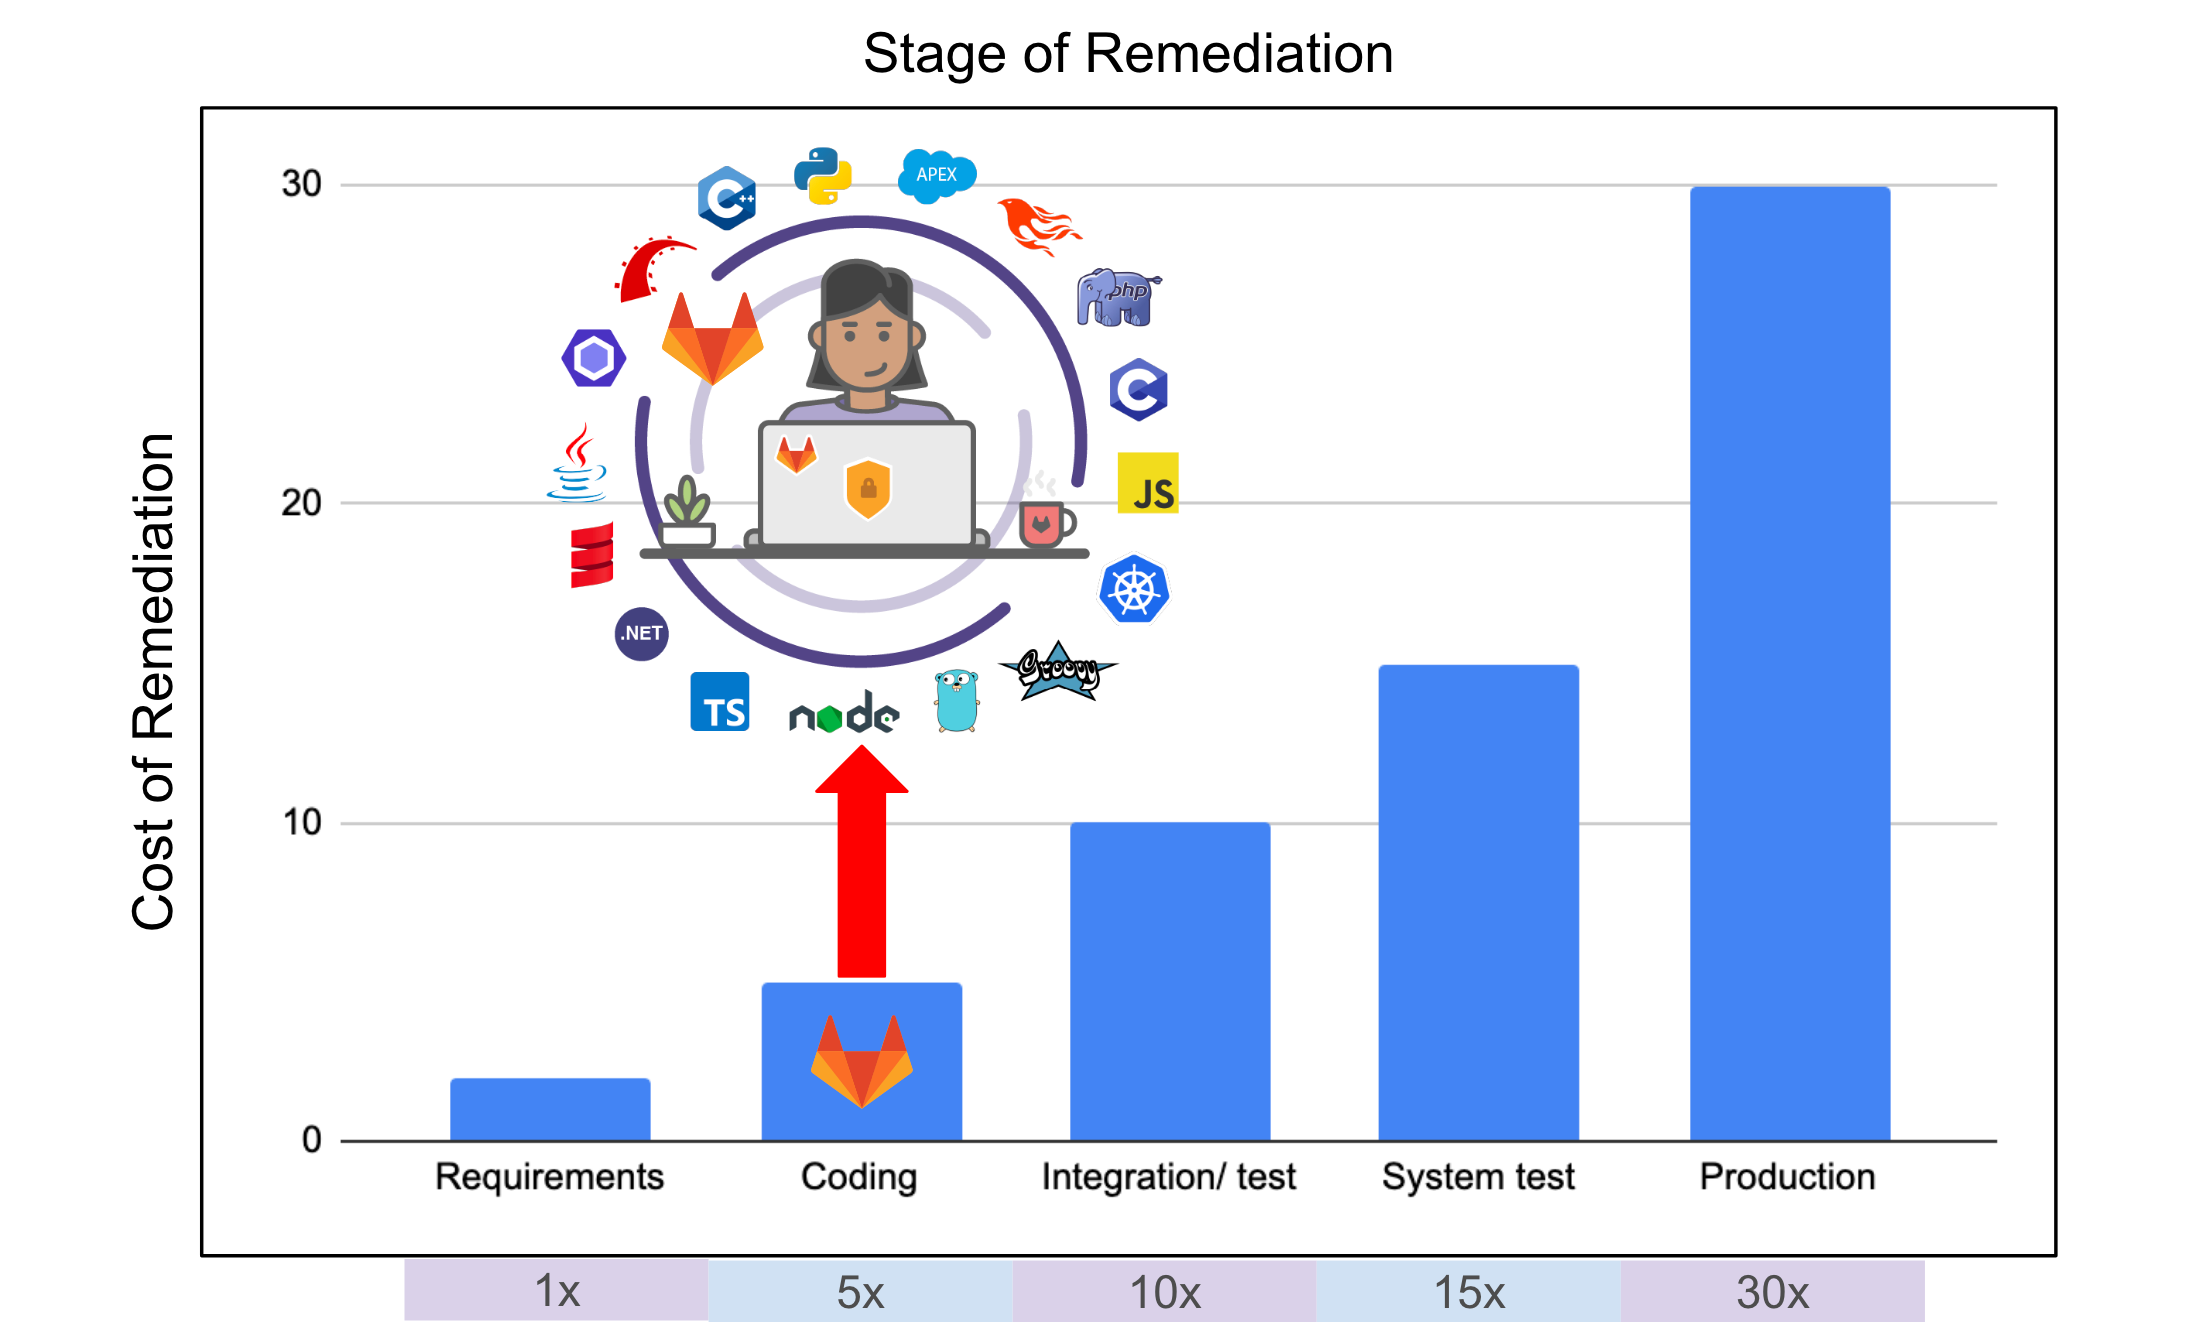 Stage of Remediation